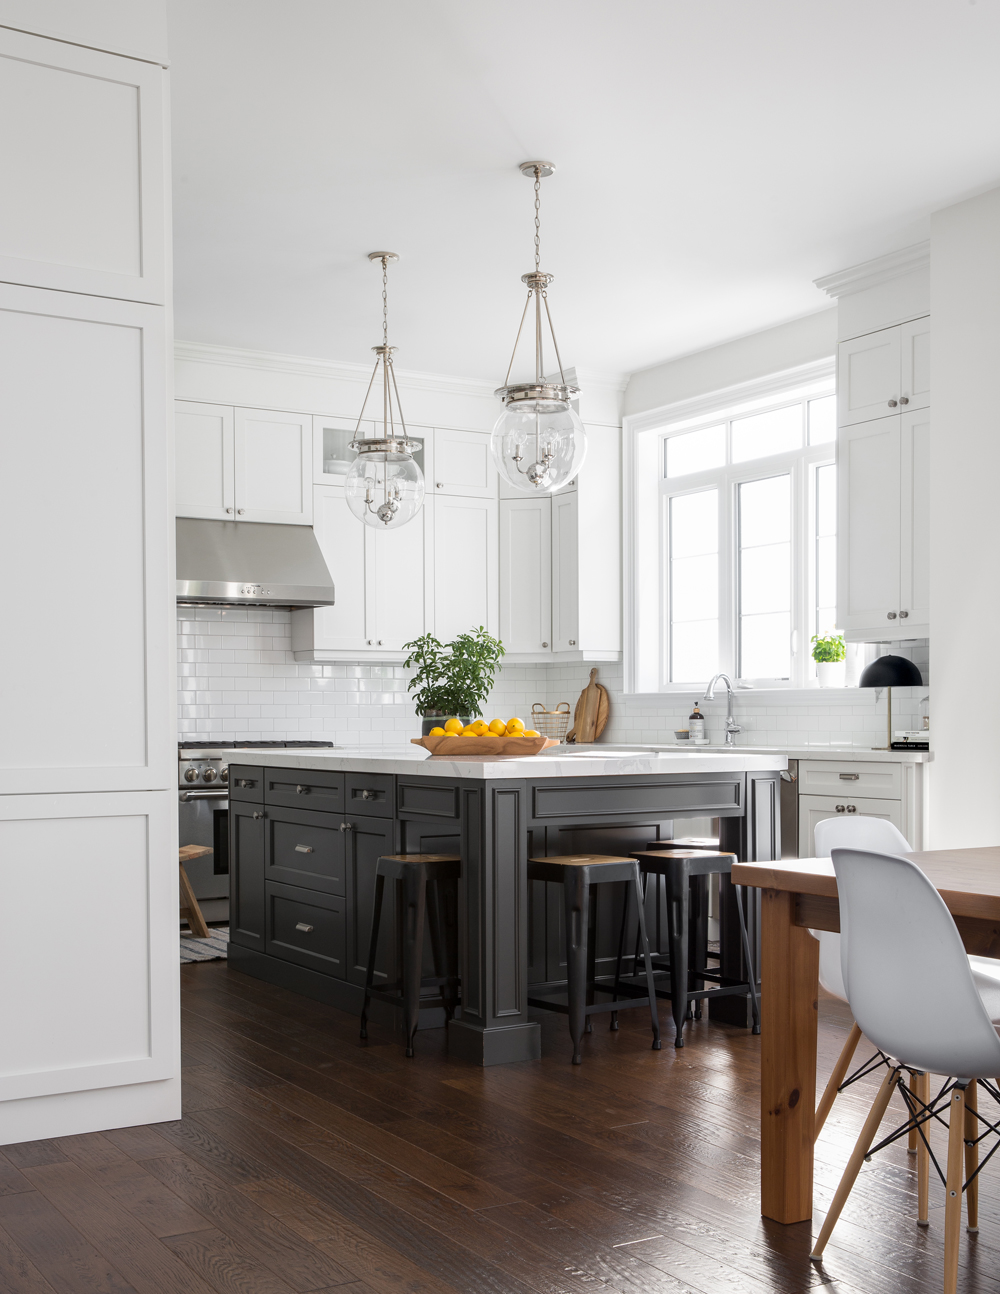 white kitchen with black based island, backless stools, wooden vessel filled with lemons on island